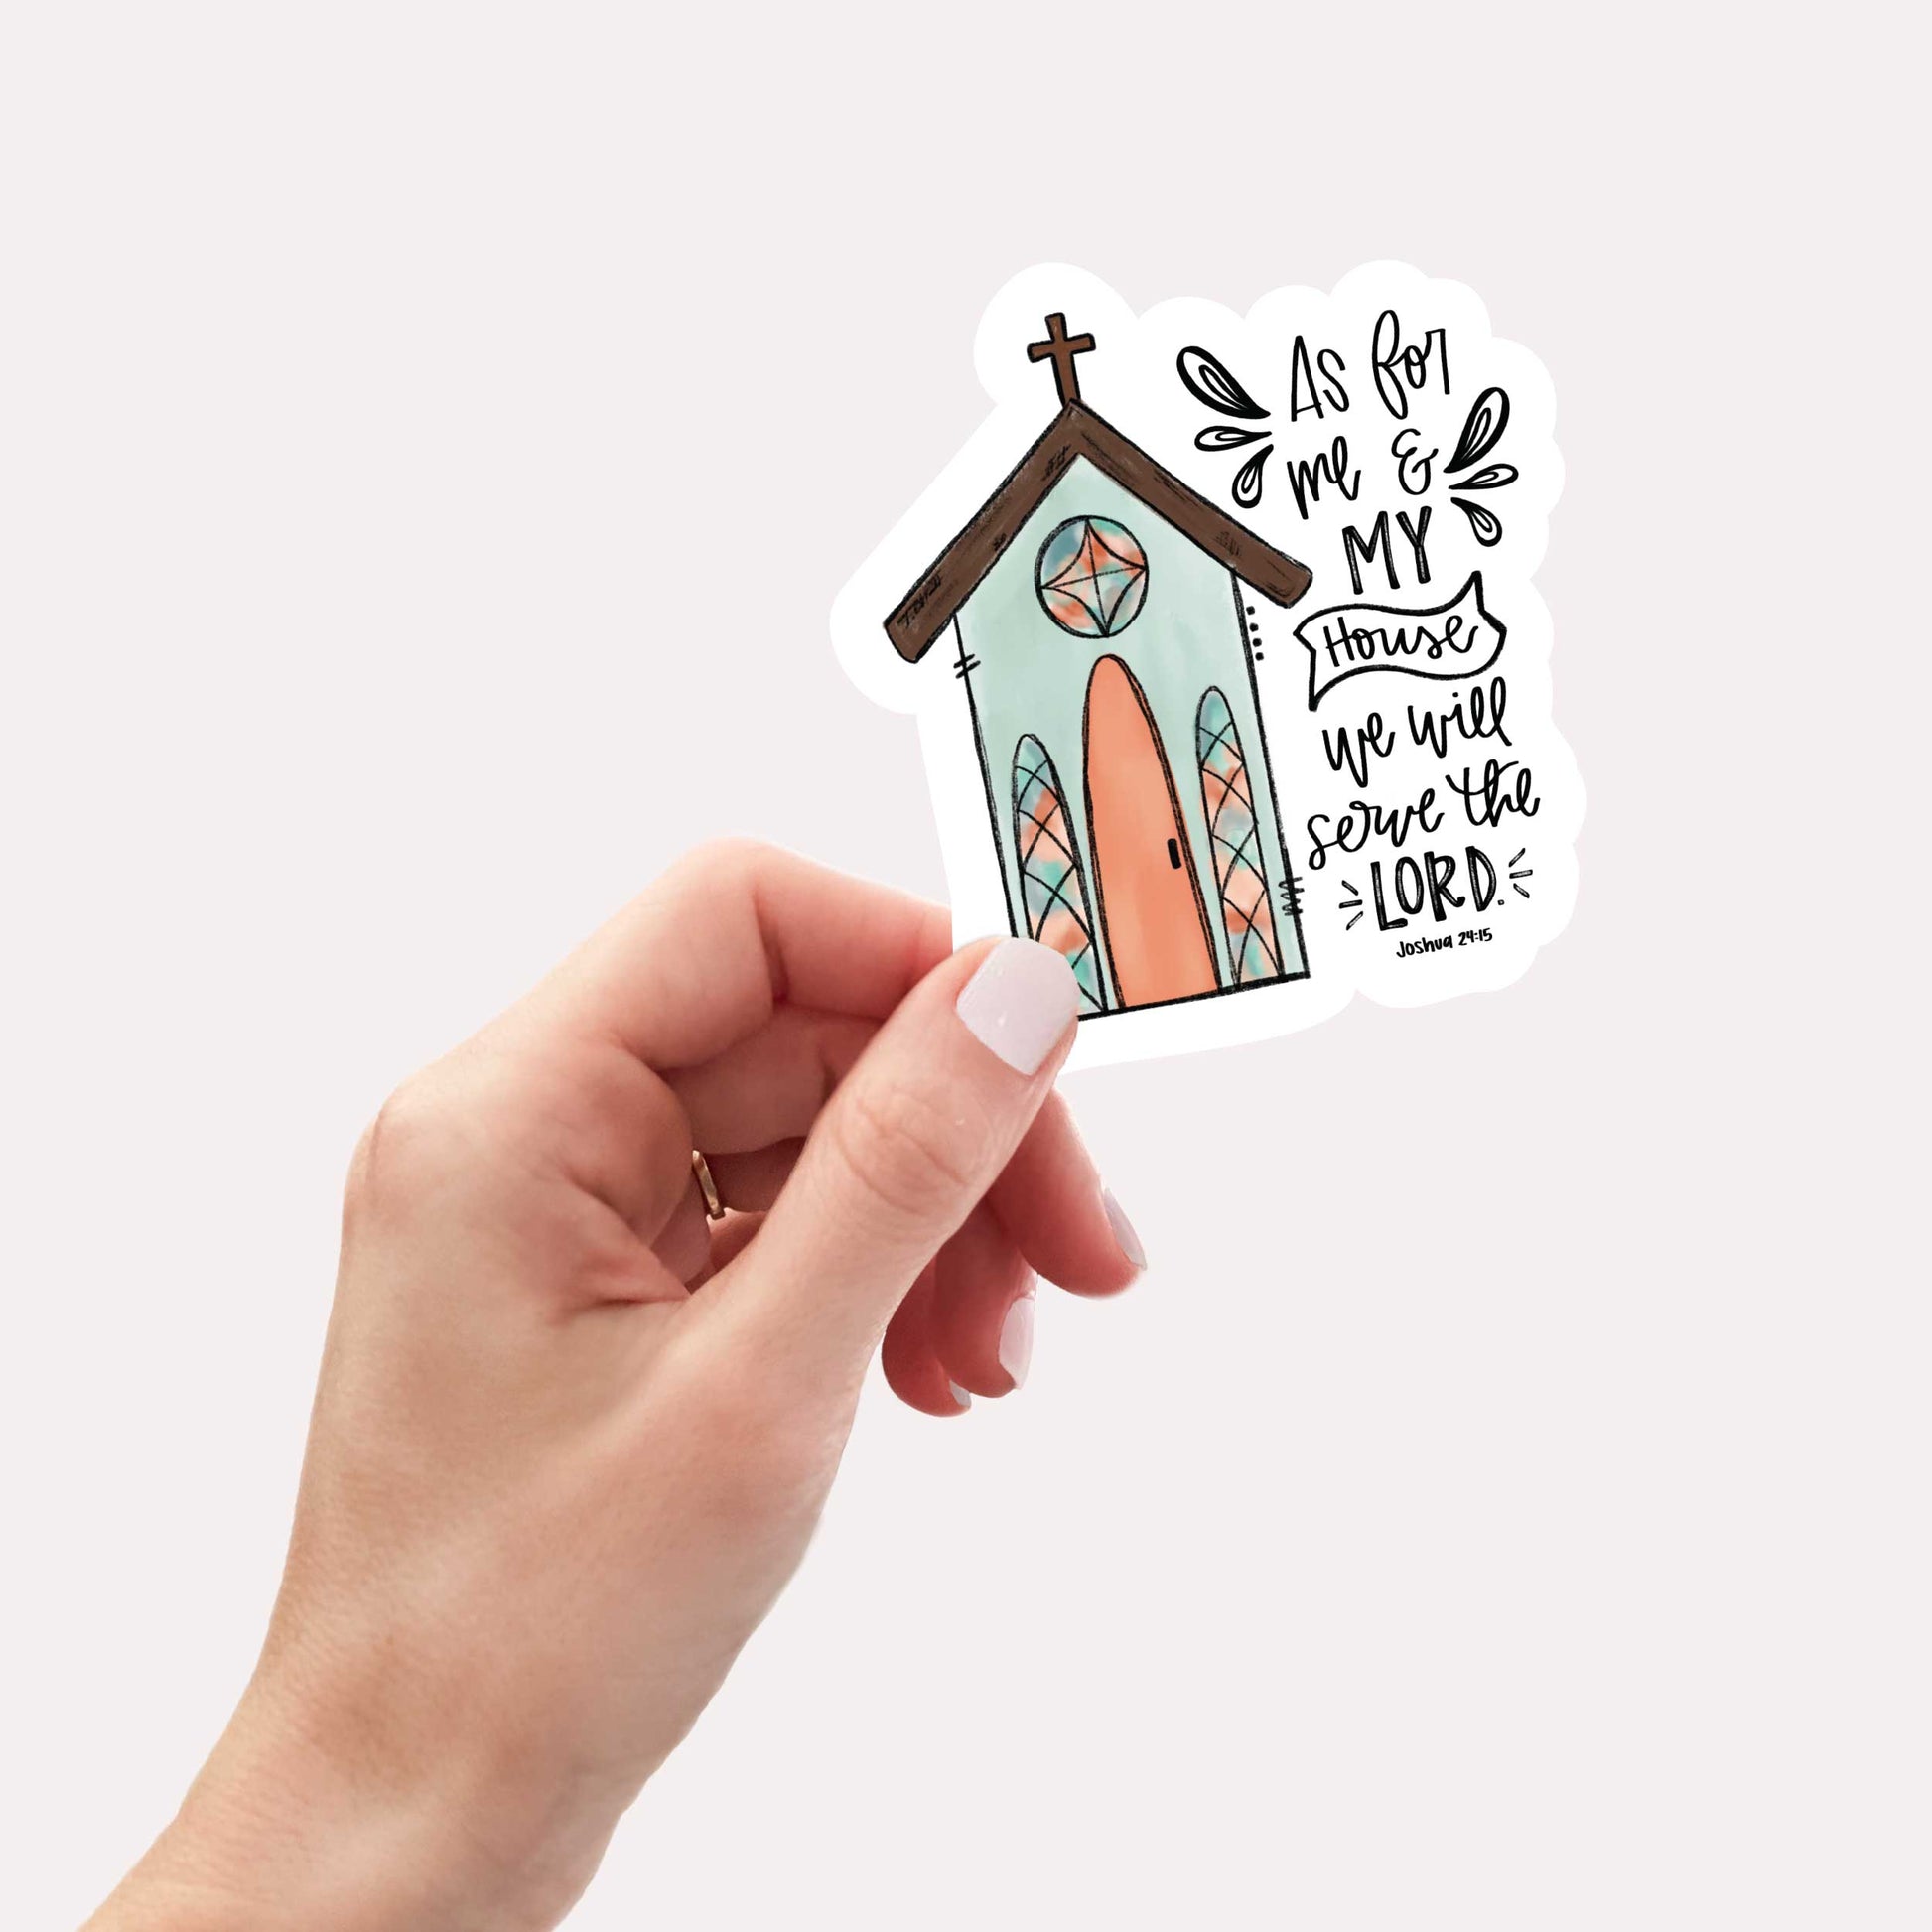 Faith-Based Stickers, Cup or Laptop Stickers, Church Art - Storm and Sky Shoppe